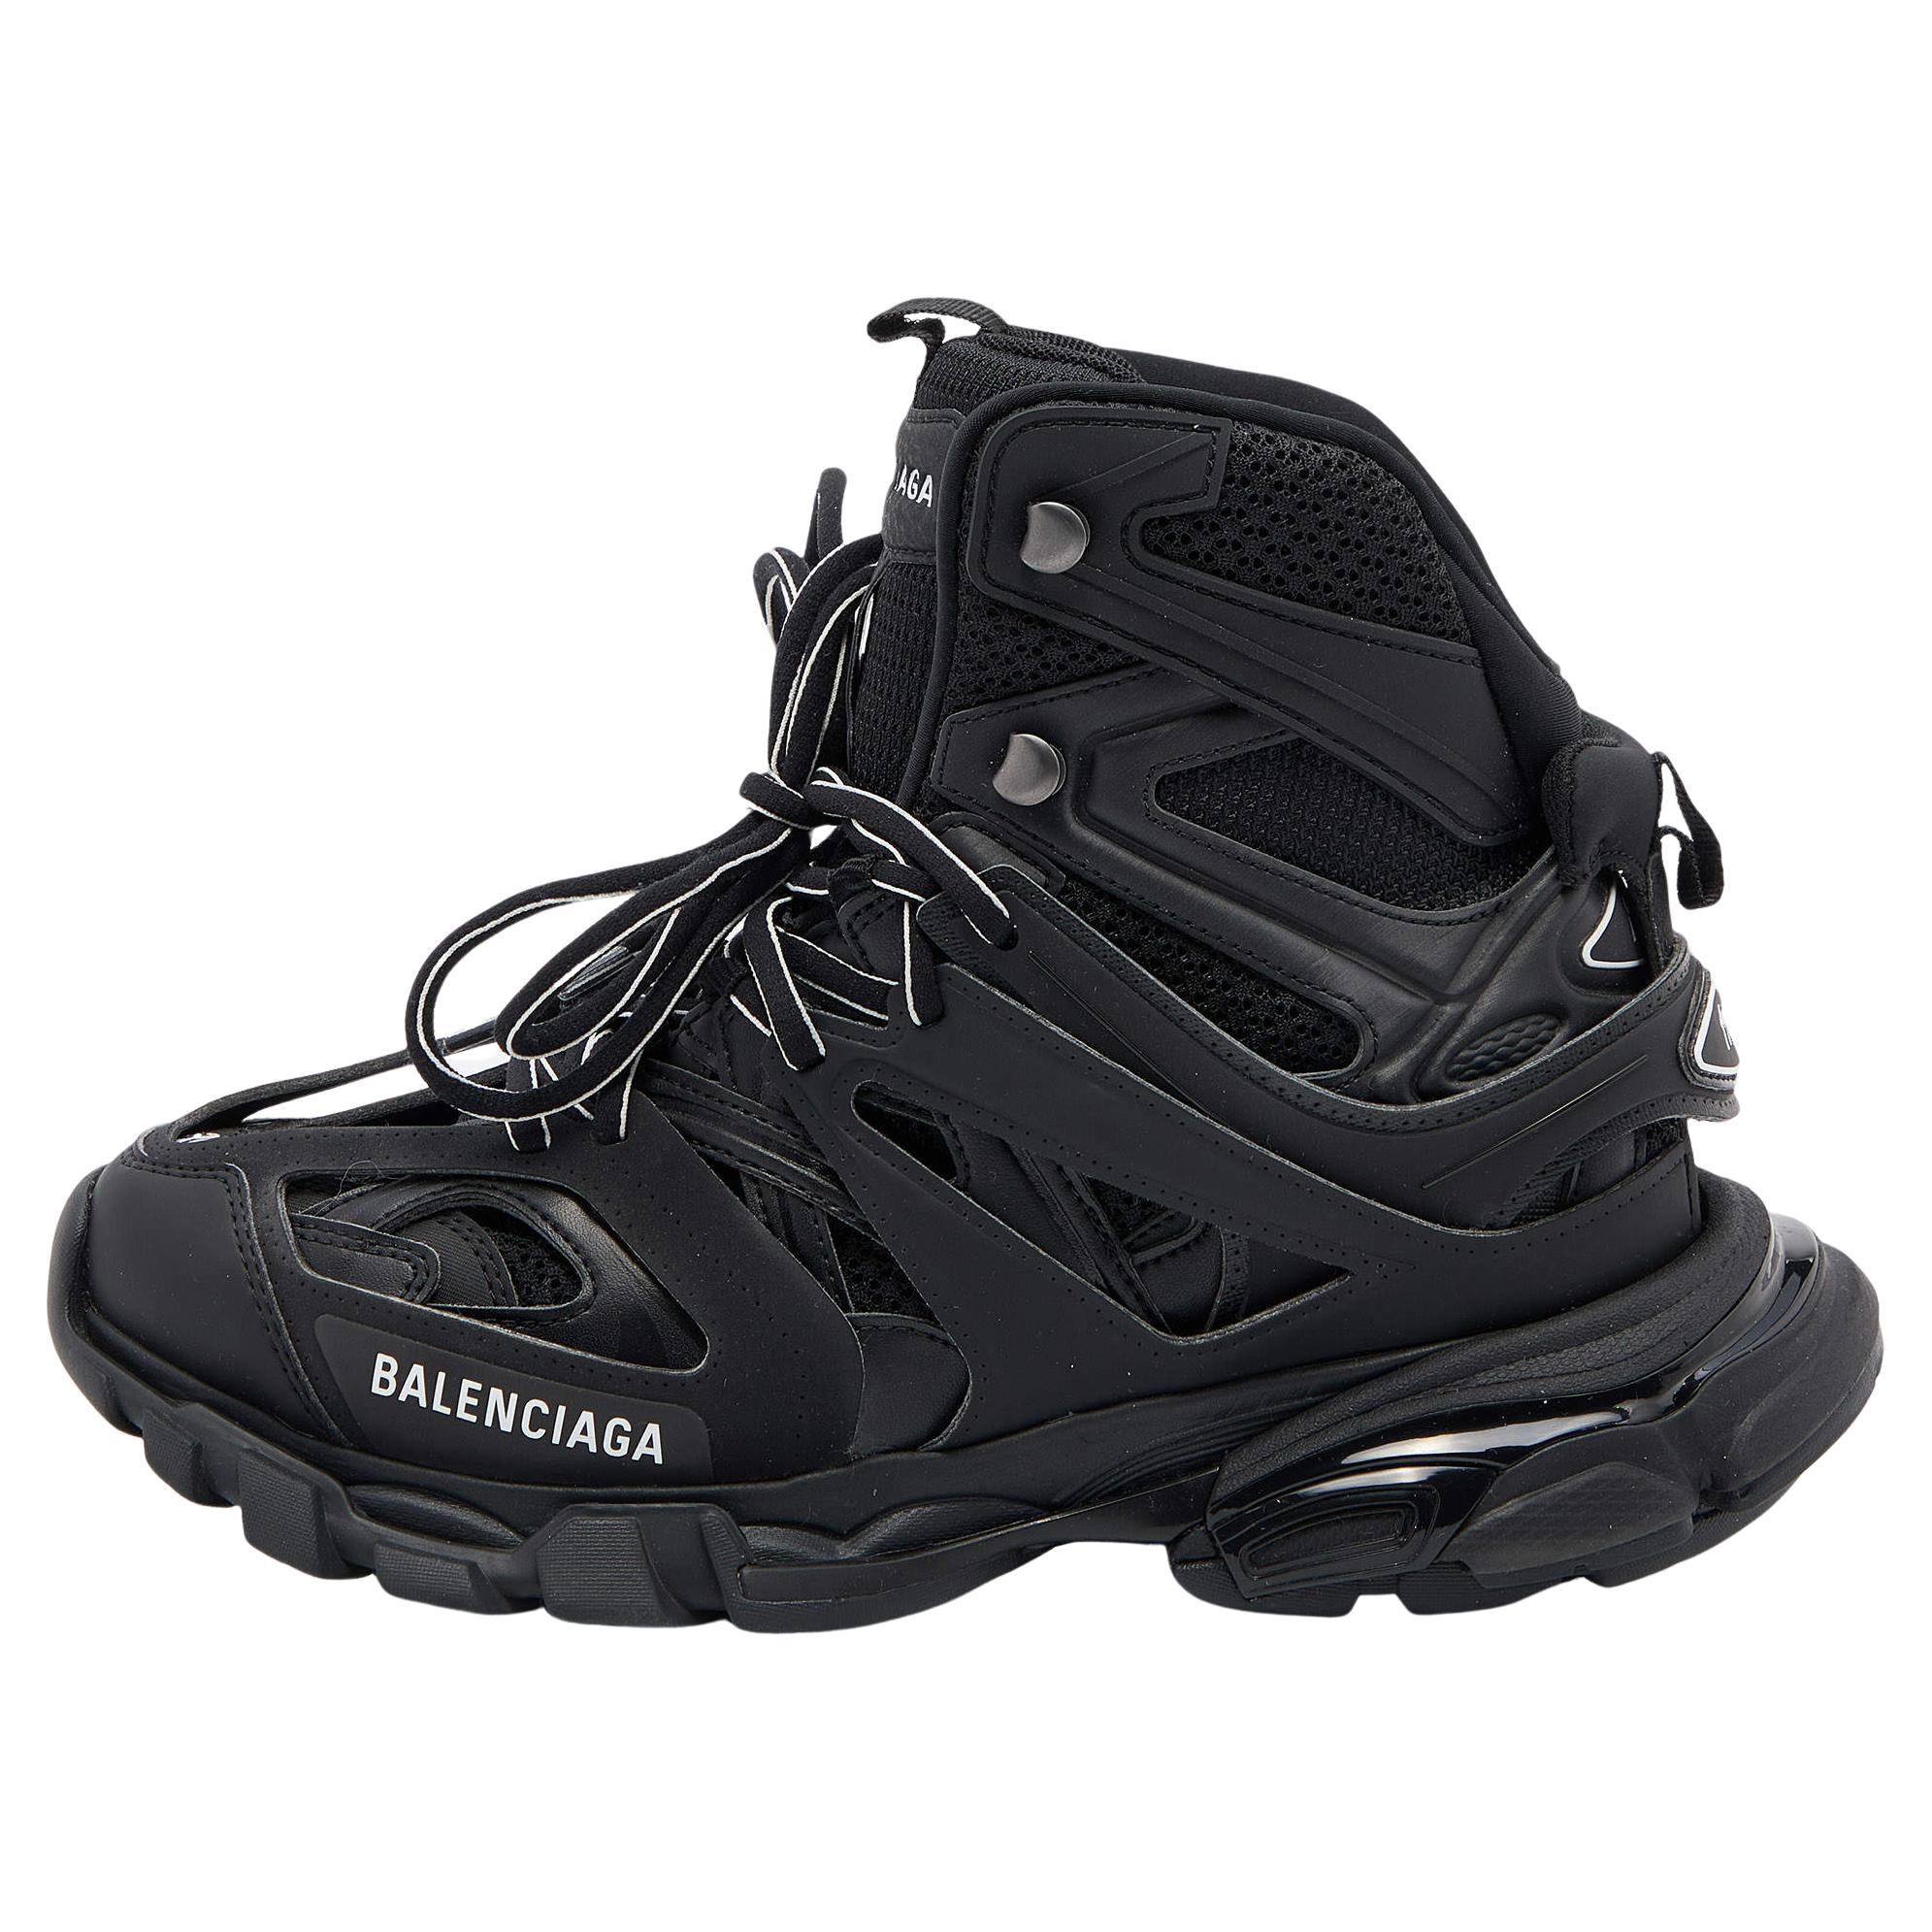 Balenciaga Black Leather and Mesh Hike Sneakers Size 39 For at